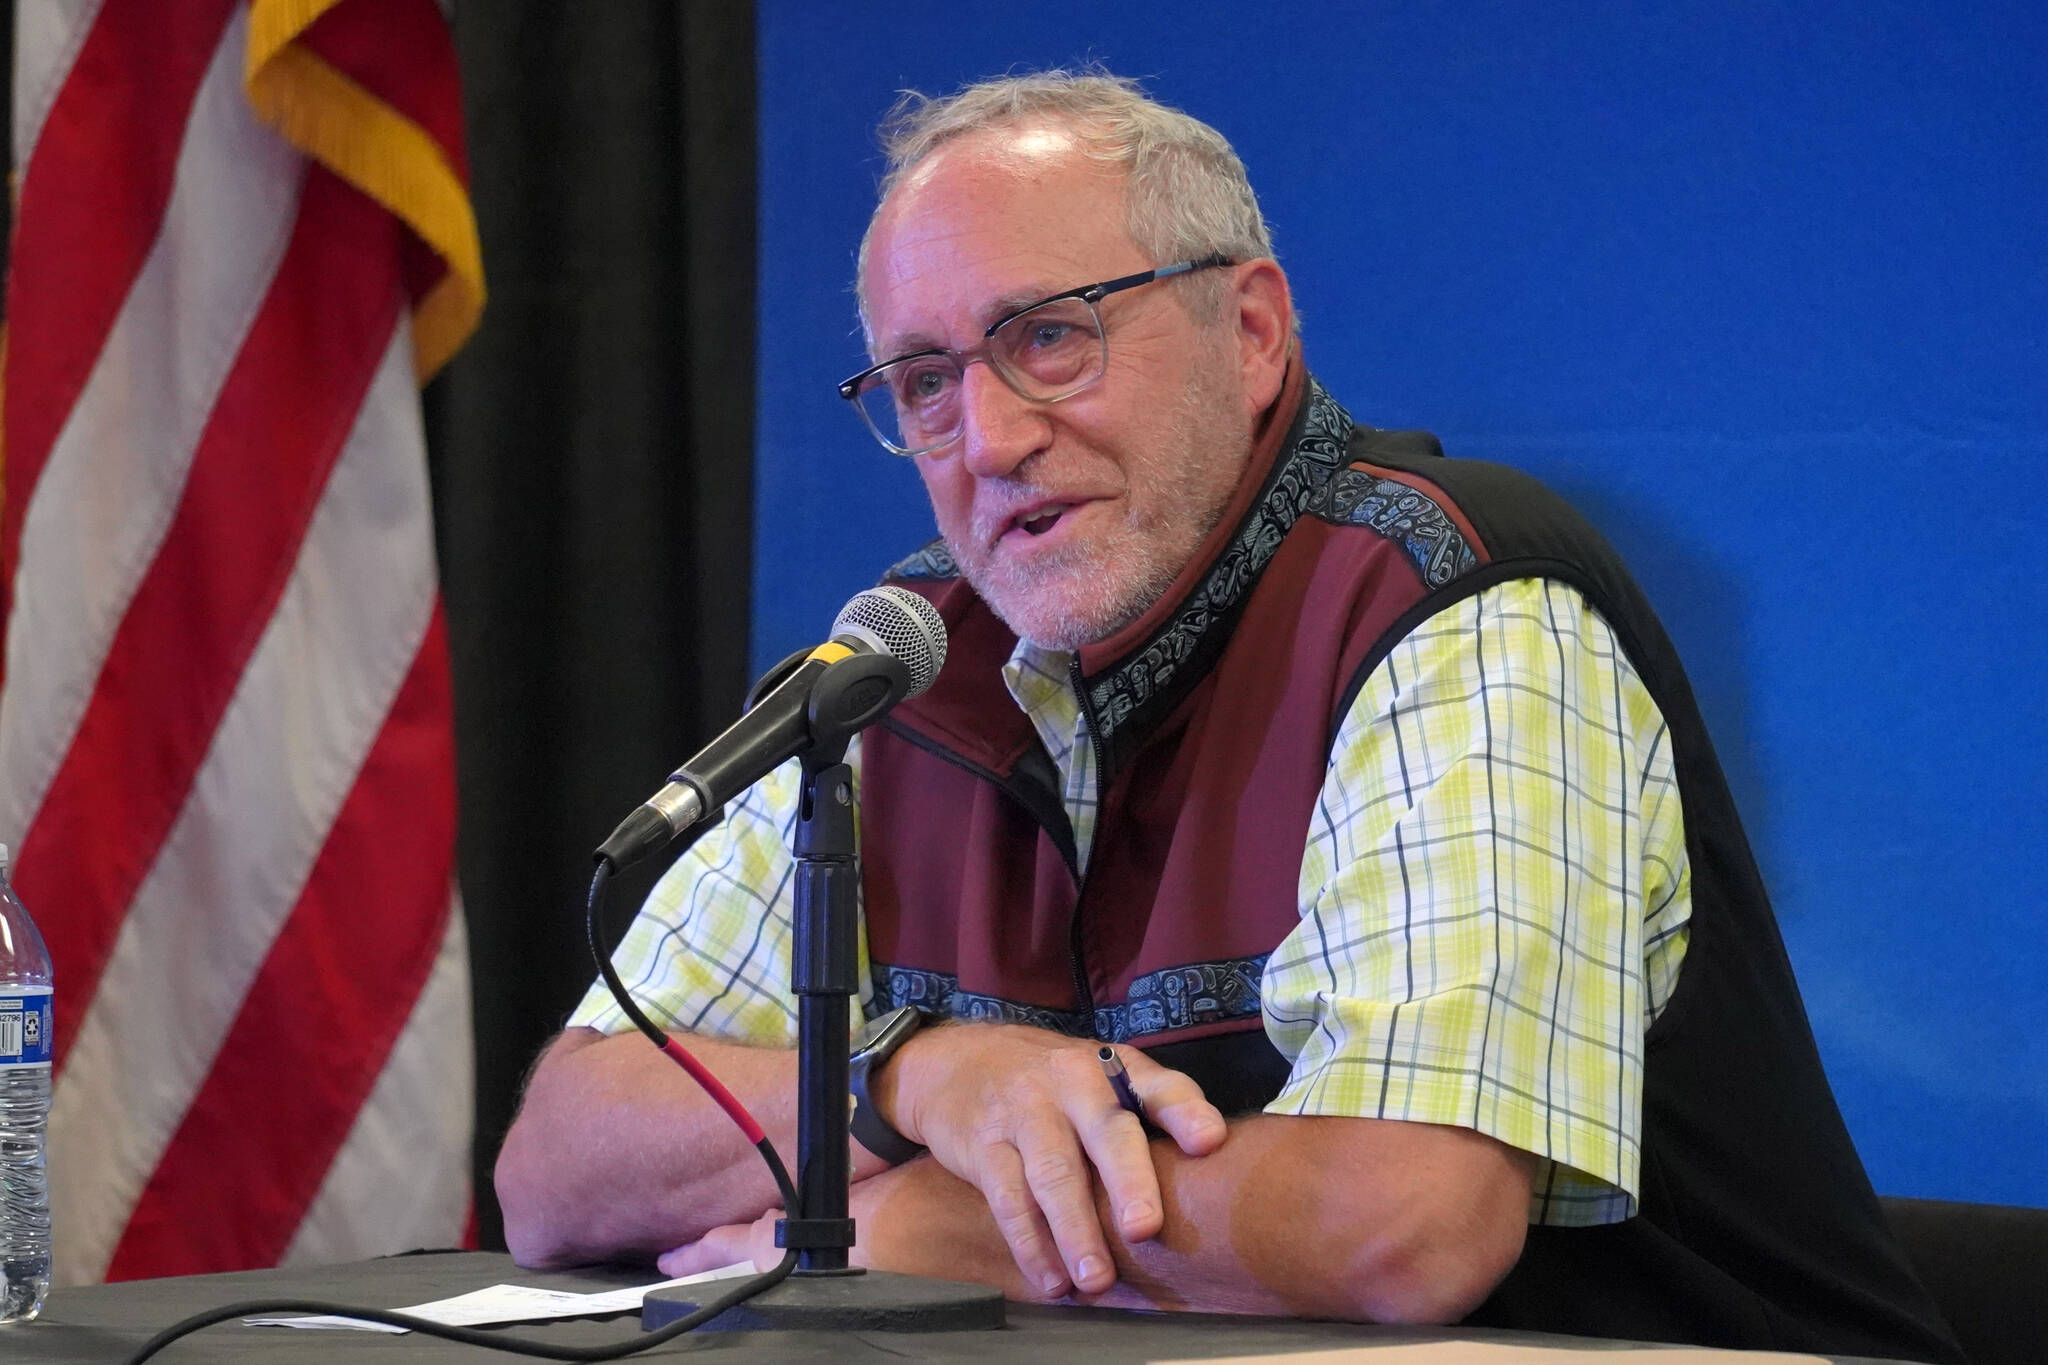 Alaska Department of Fish and Game Commissioner Doug Vincent-Lang participates in a panel discussion at the Kenai River Sportfishing Association’s Kenai Classic Roundtable at the Soldotna Regional Sports Complex in Soldotna, Alaska, on Wednesday, Aug. 23, 2023. (Jake Dye/Peninsula Clarion)